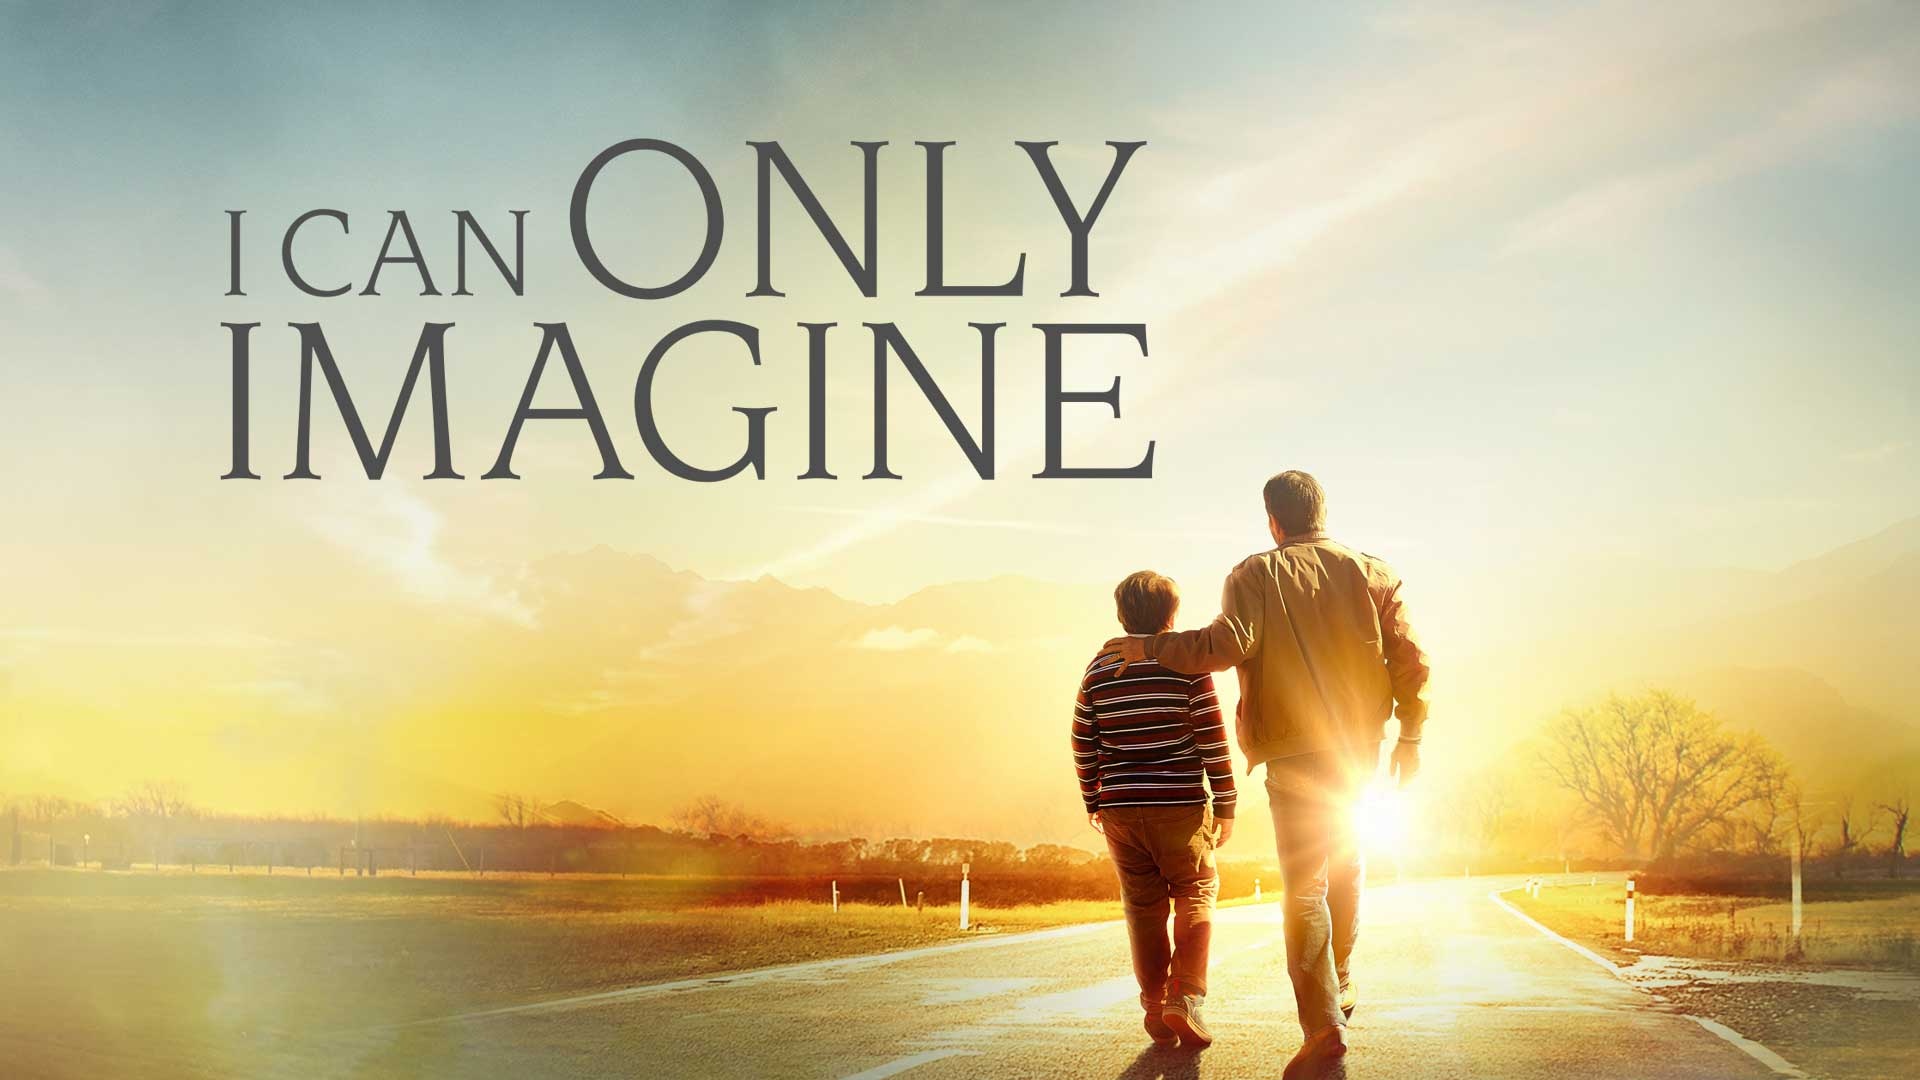 I Can Only Imagine Movie, Emotional journey, South Tampa Fellowship, Faith-based film, 1920x1080 Full HD Desktop